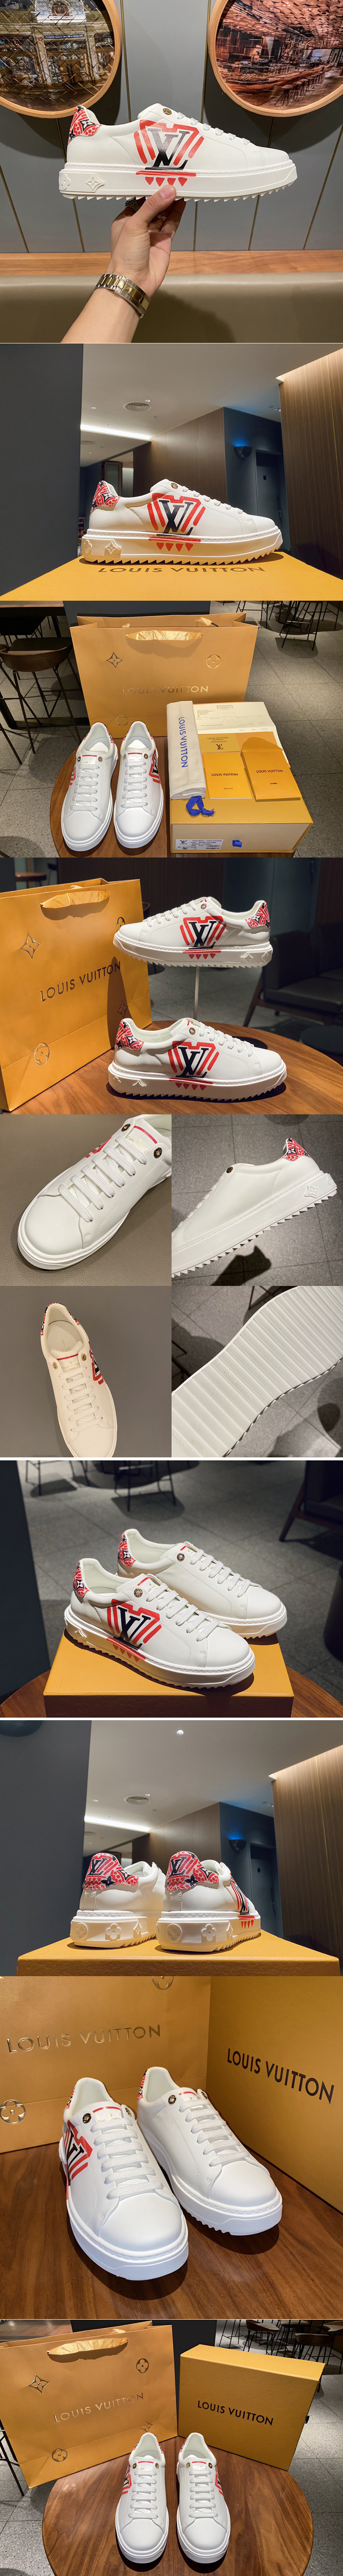 Replica Louis Vuitton 1A85O6 LV Crafty Time Out sneaker in Red Printed calf leather